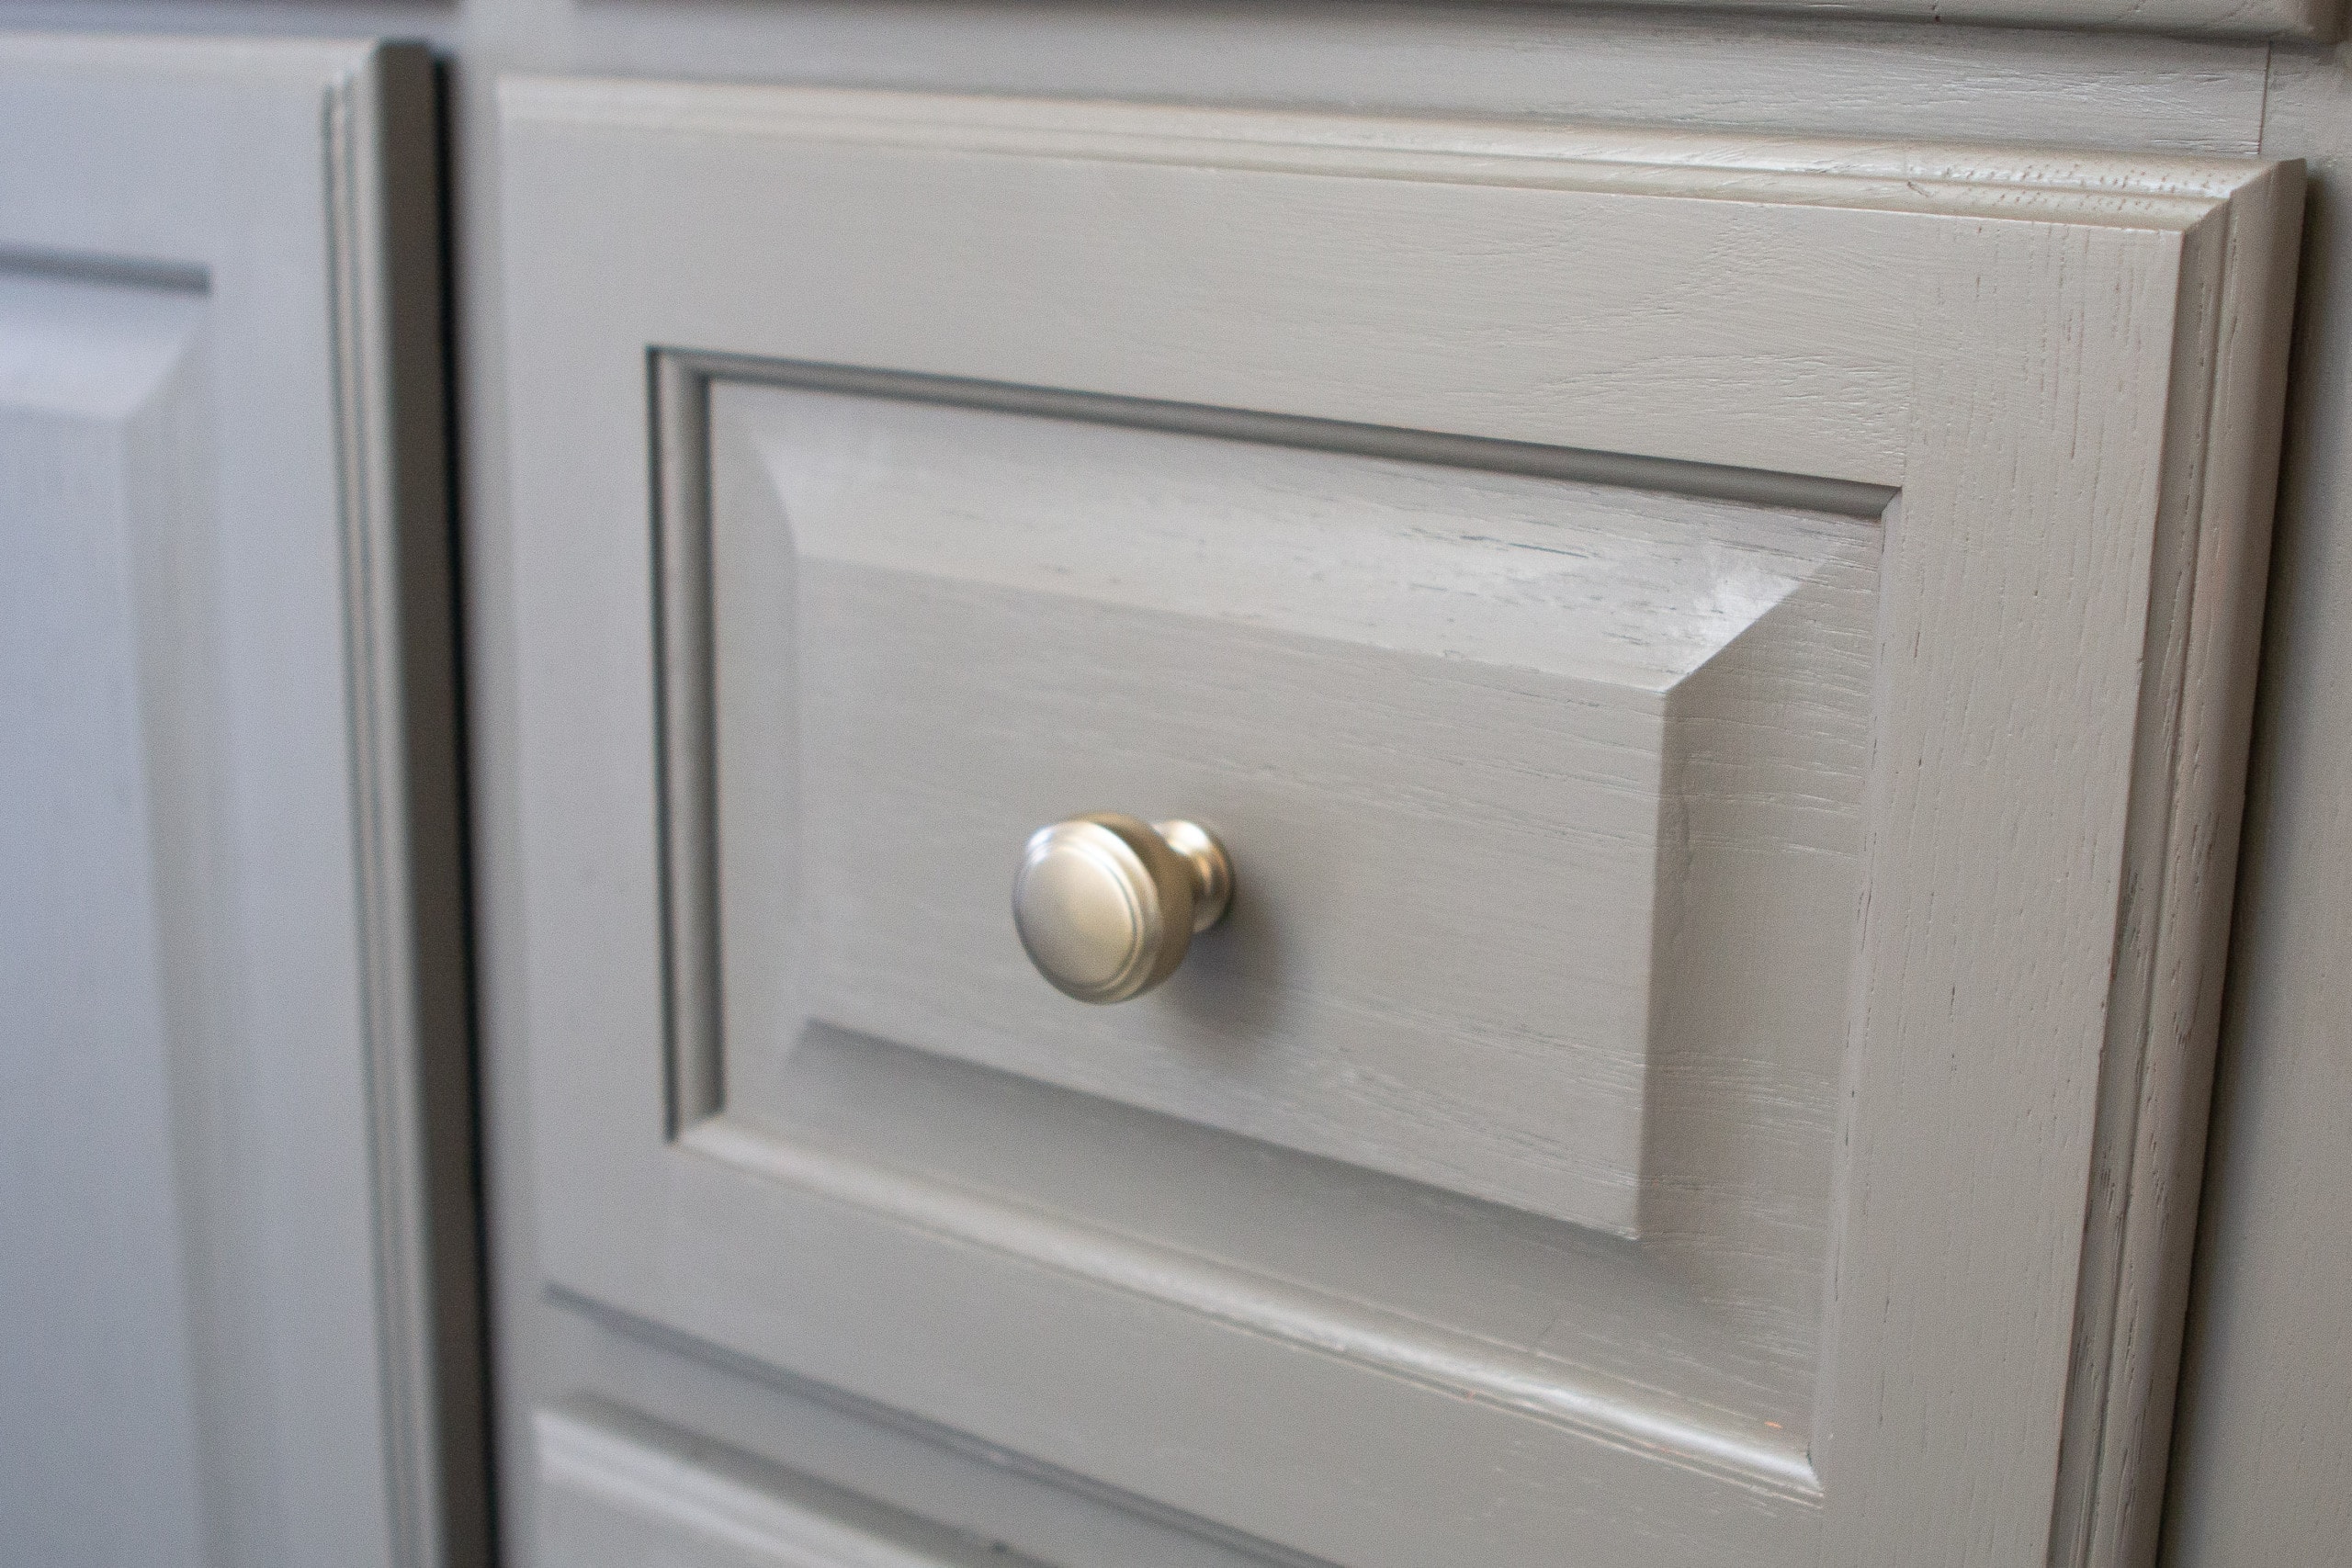 New gold knobs on a sage green cabinet